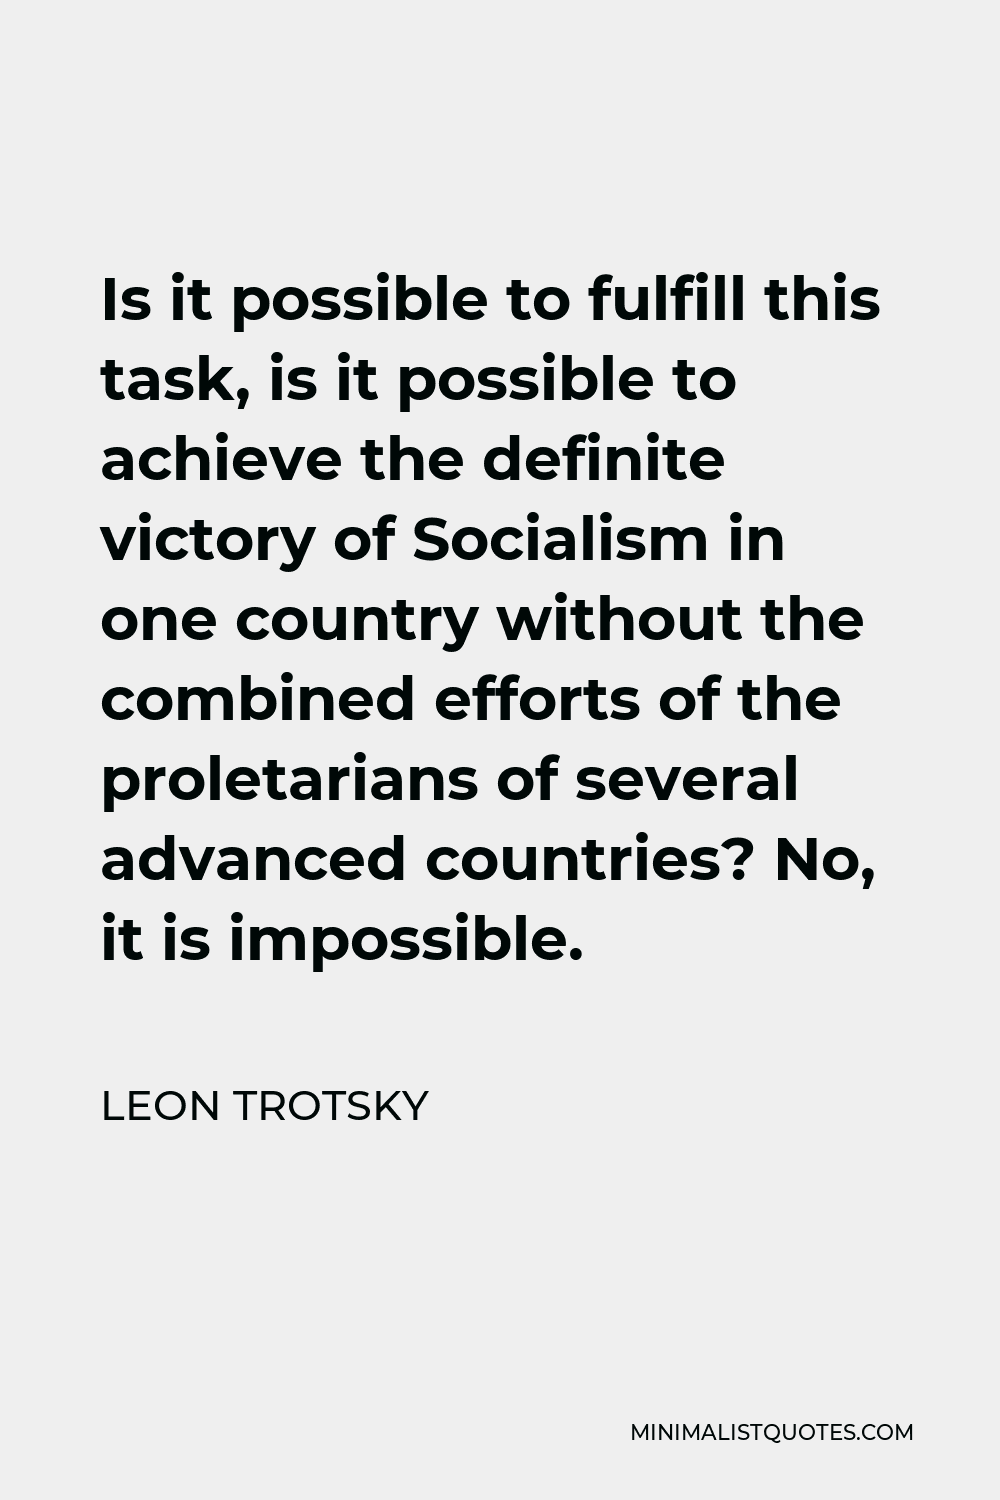 Leon Trotsky Quote - Is it possible to fulfill this task, is it possible to achieve the definite victory of Socialism in one country without the combined efforts of the proletarians of several advanced countries? No, it is impossible.